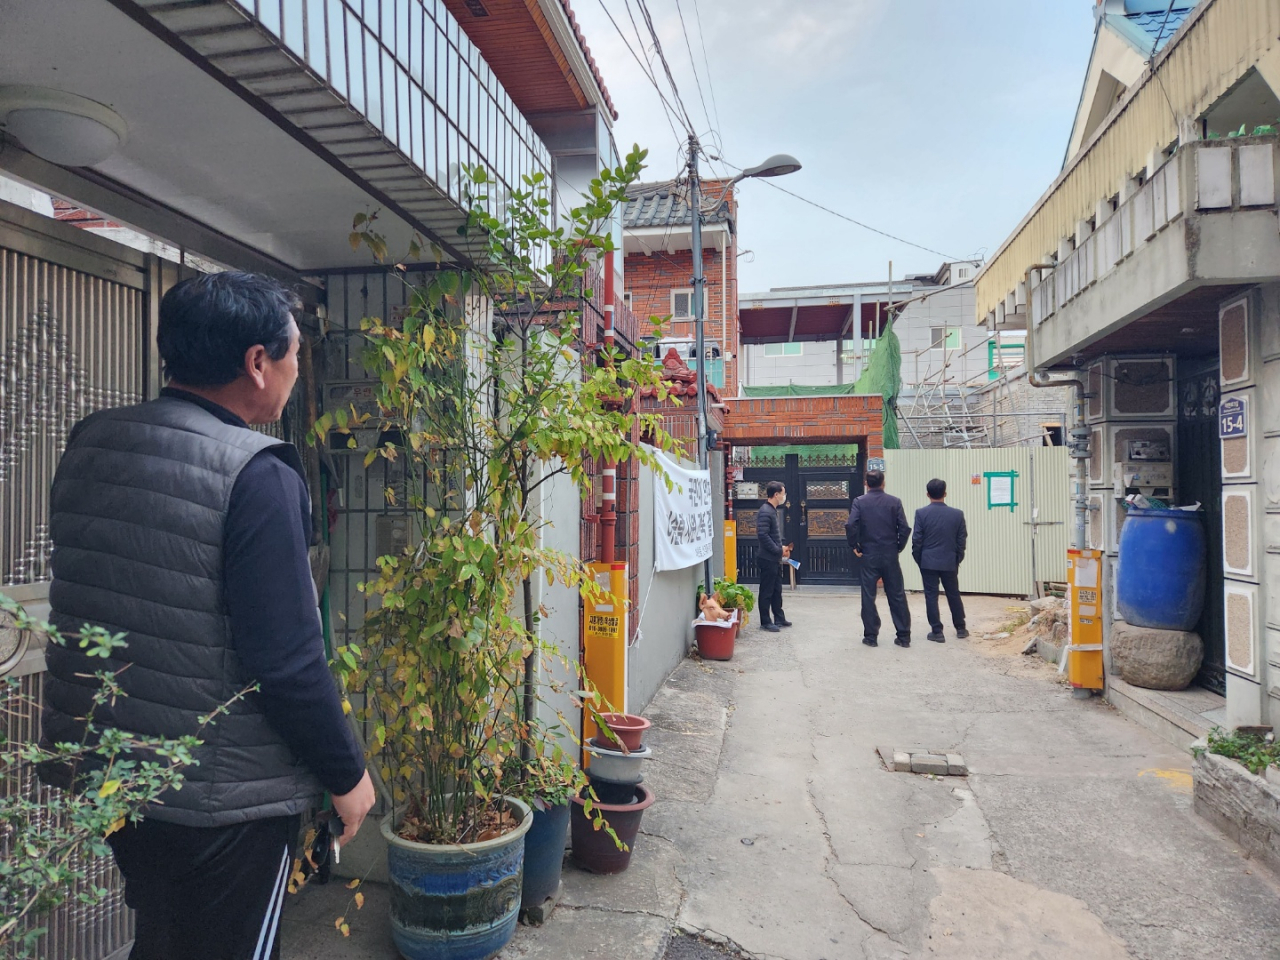 A man surnamed Jang looks out at the construction site in front of his home as three officials from Daegu's Buk-gu Office inspect the area, Wednesday. (Choi Jae-hee/The Korea Herald)